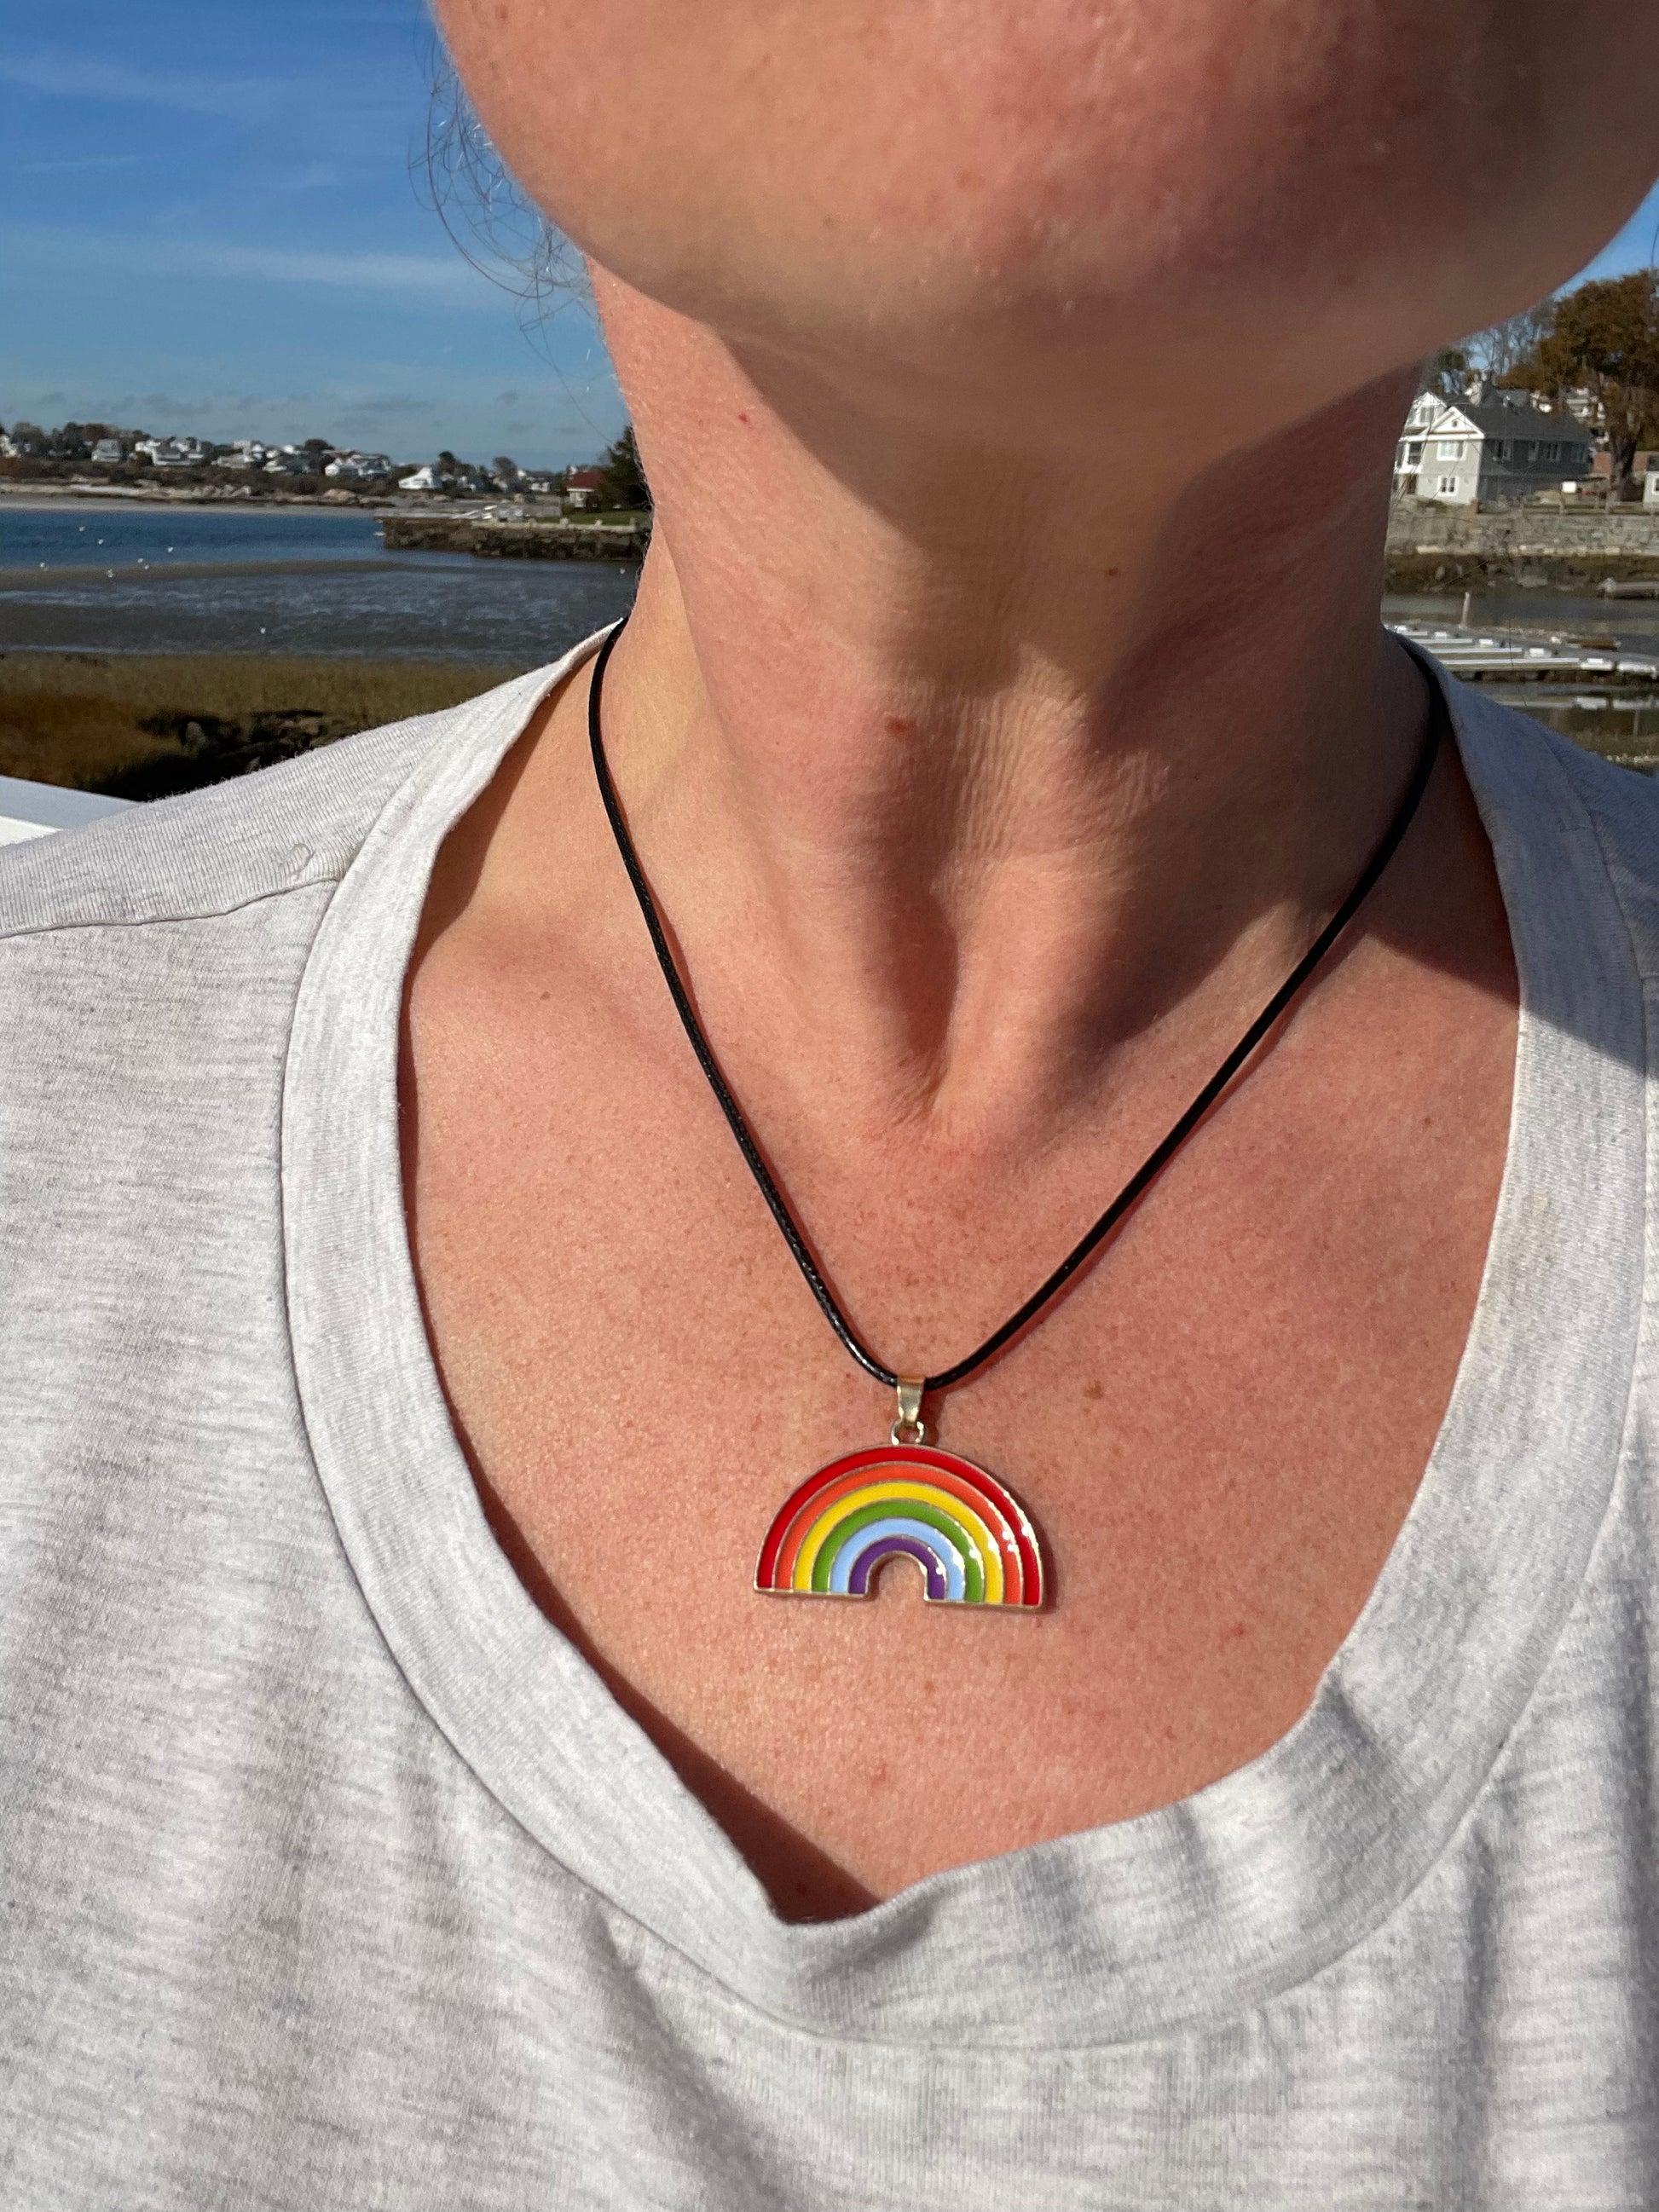 Rainbow necklace on a neck